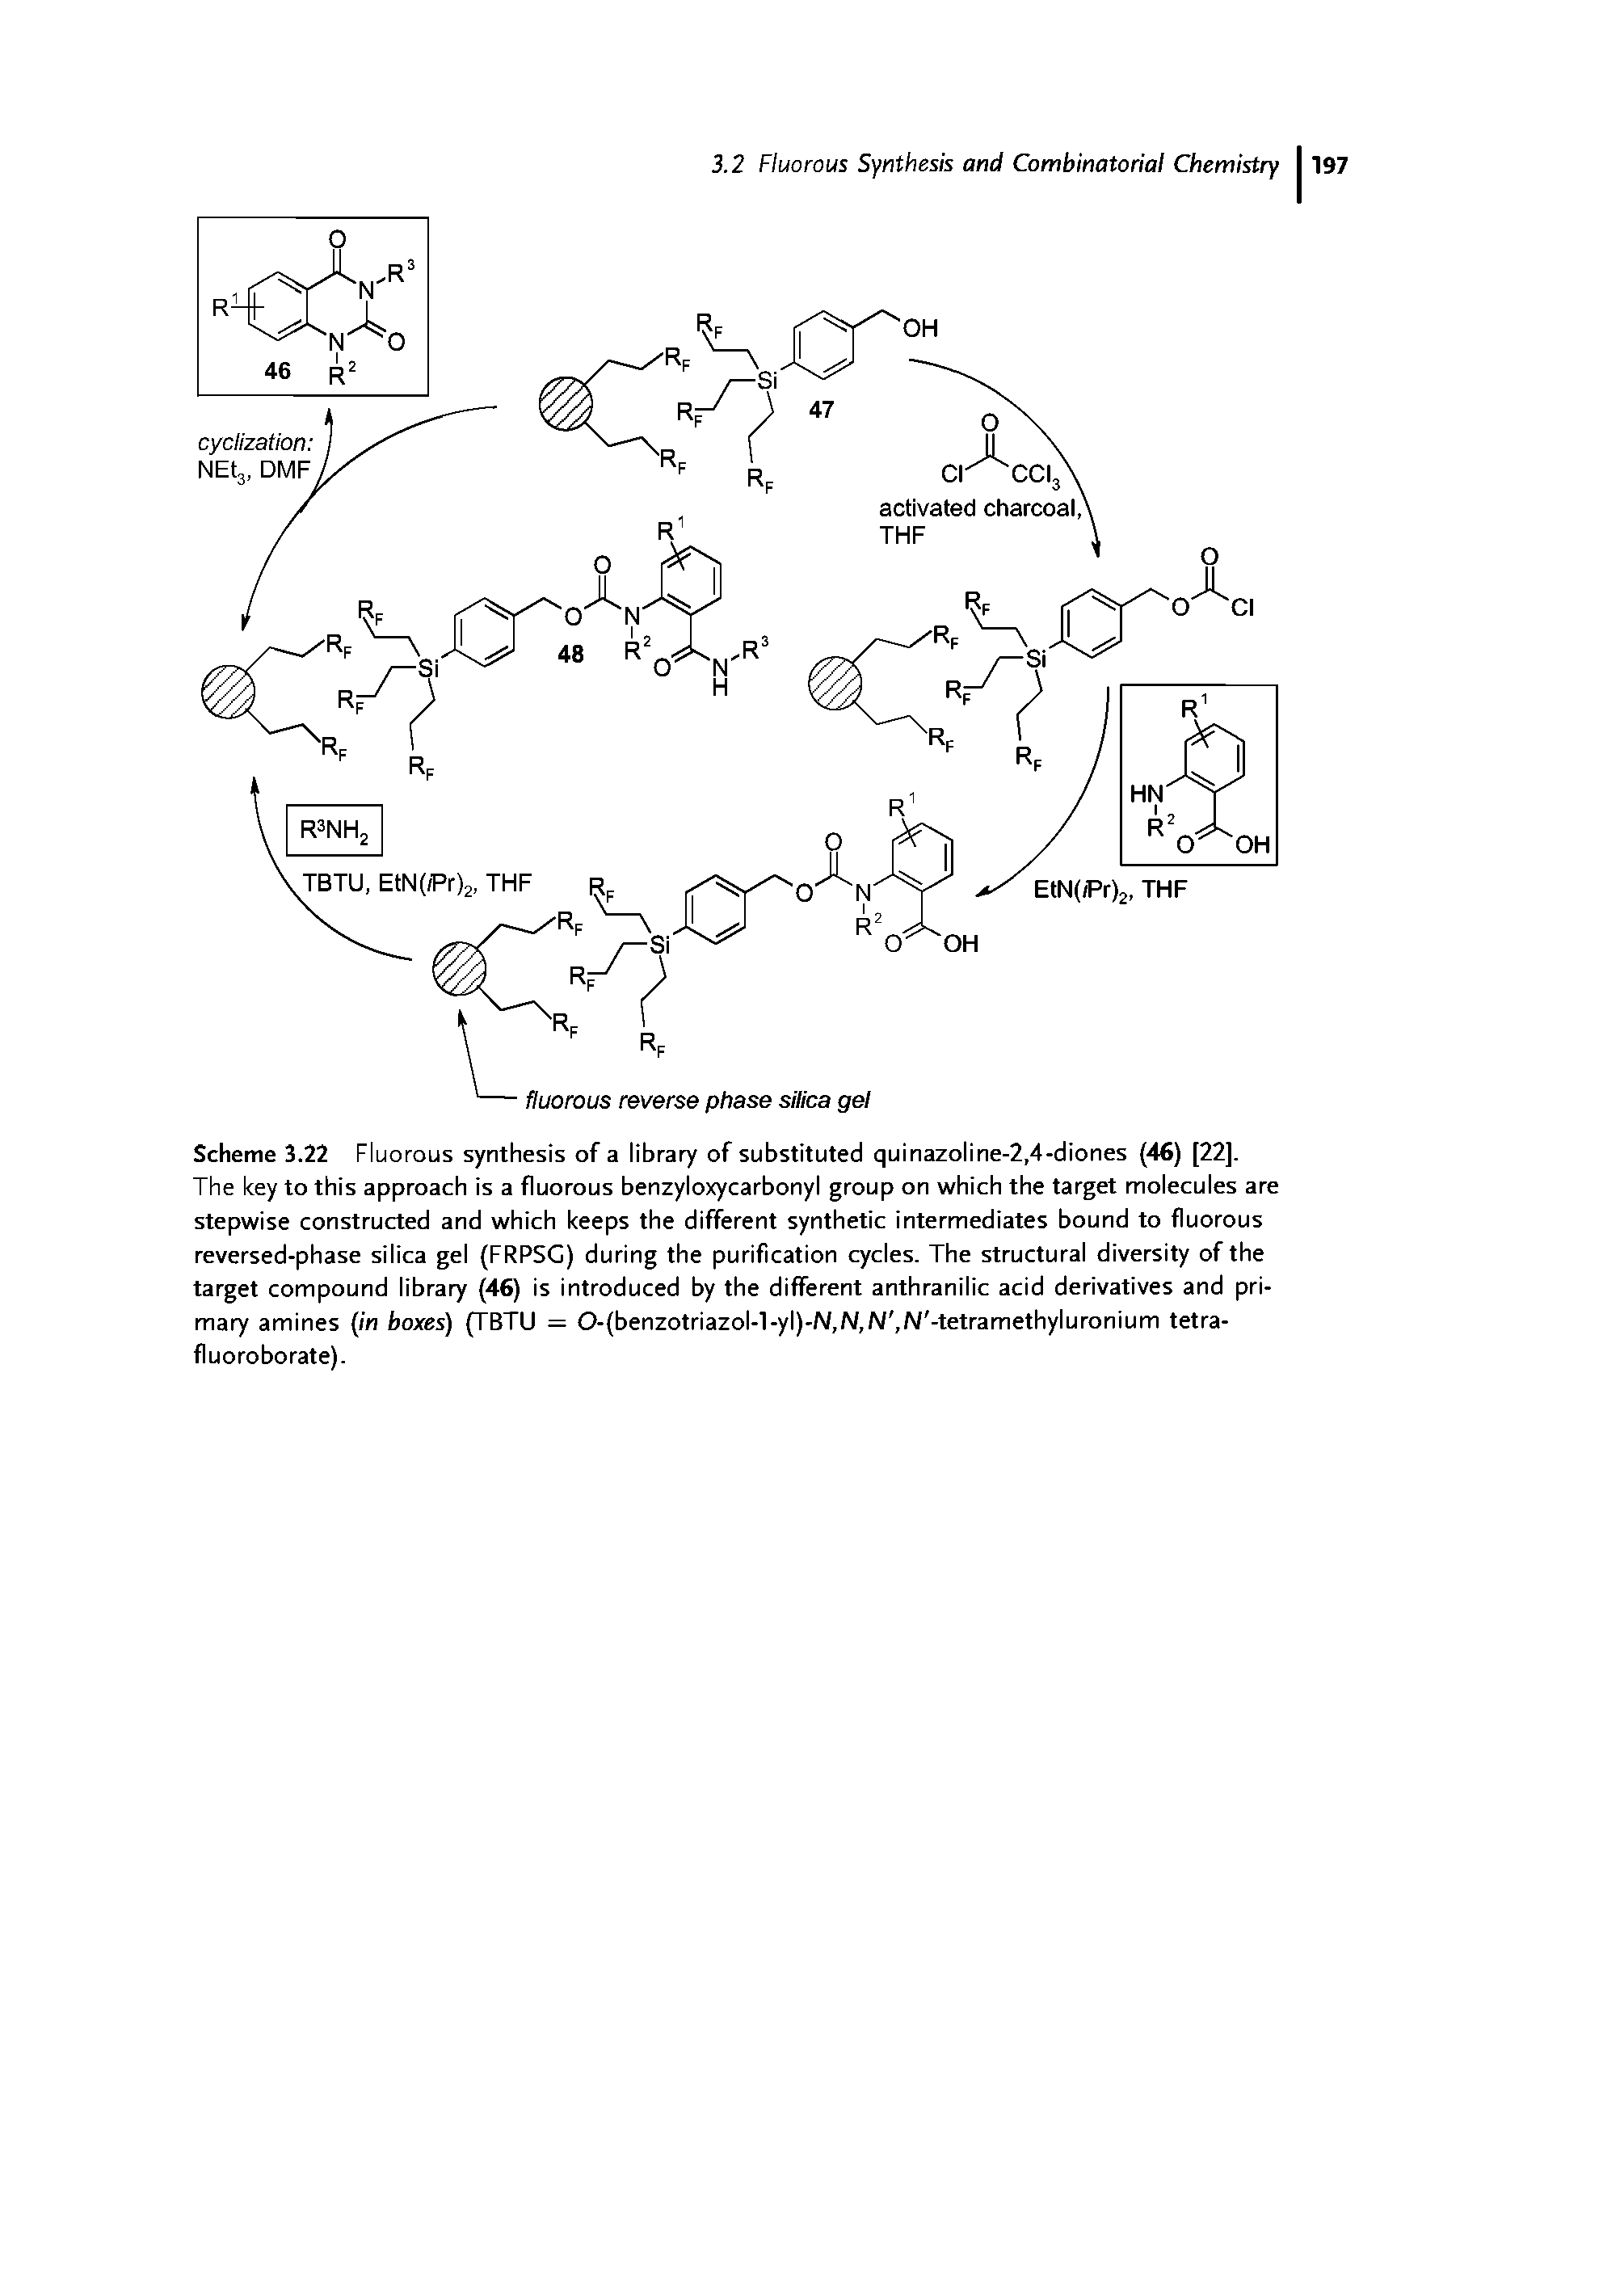 Scheme 3.22 Fluorous synthesis of a library of substituted quinazoline-2,4-diones (46) [22]. The key to this approach is a fluorous benzyloxycarbonyl group on which the target molecules are stepwise constructed and which keeps the different synthetic intermediates bound to fluorous reversed-phase silica gel (FRPSG) during the purification cycles. The structural diversity of the target compound library (46) is introduced by the different anthranilic acid derivatives and primary amines in boxes) (TBTU = 0-(benzotriazol-1-yl)-N,/ /,N, N -tetramethyluronium tetrafluoroborate).